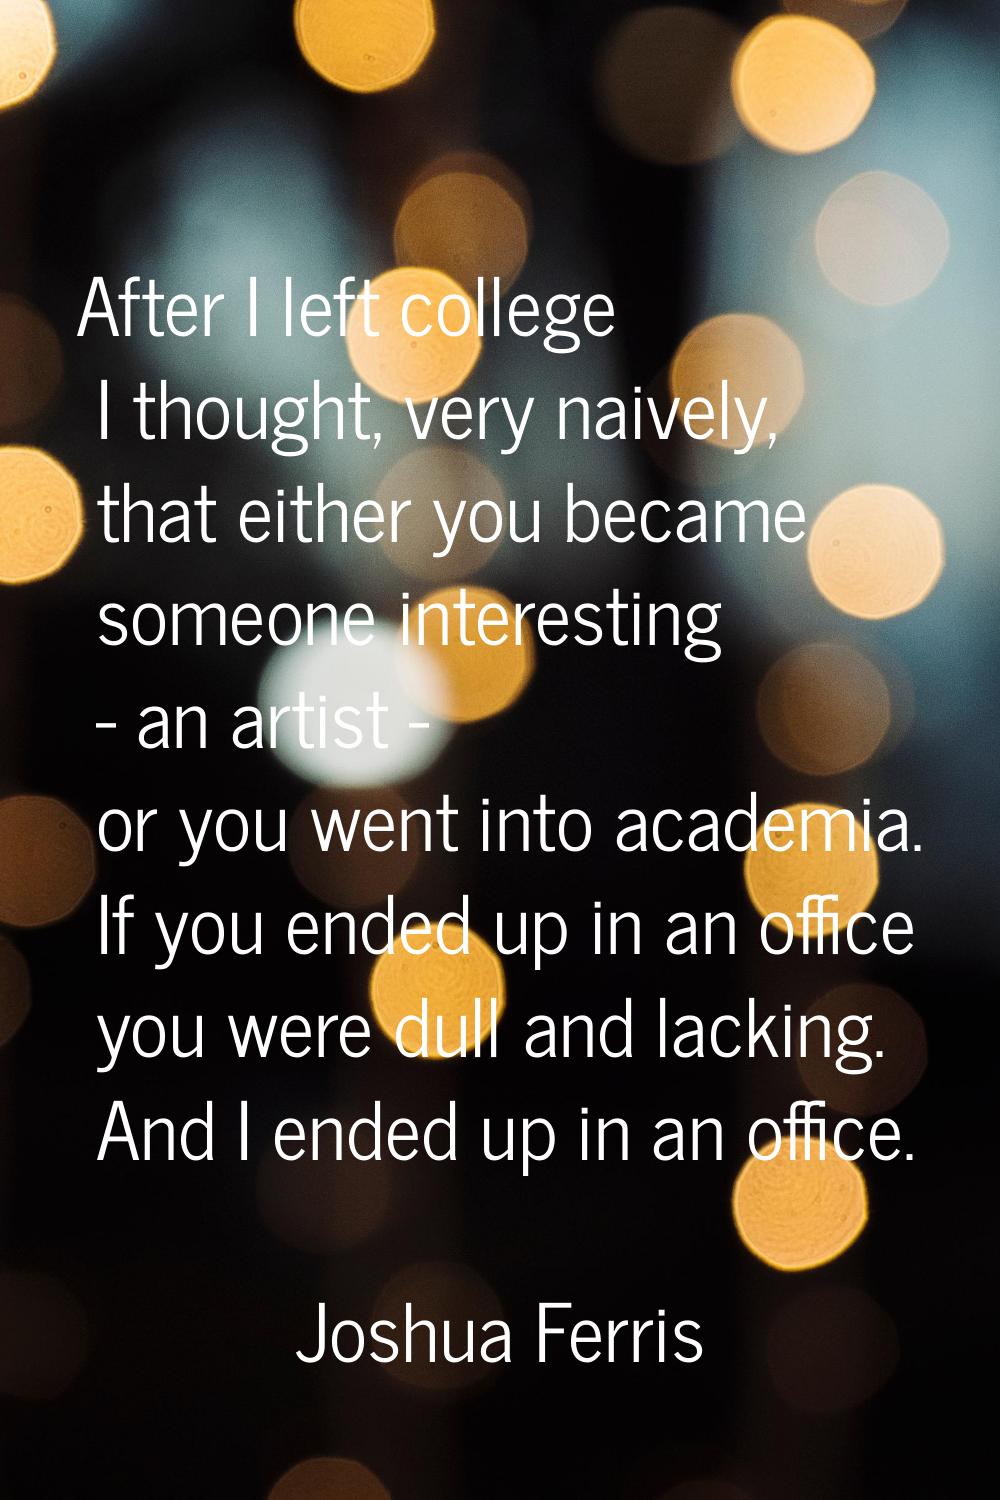 After I left college I thought, very naively, that either you became someone interesting - an artis